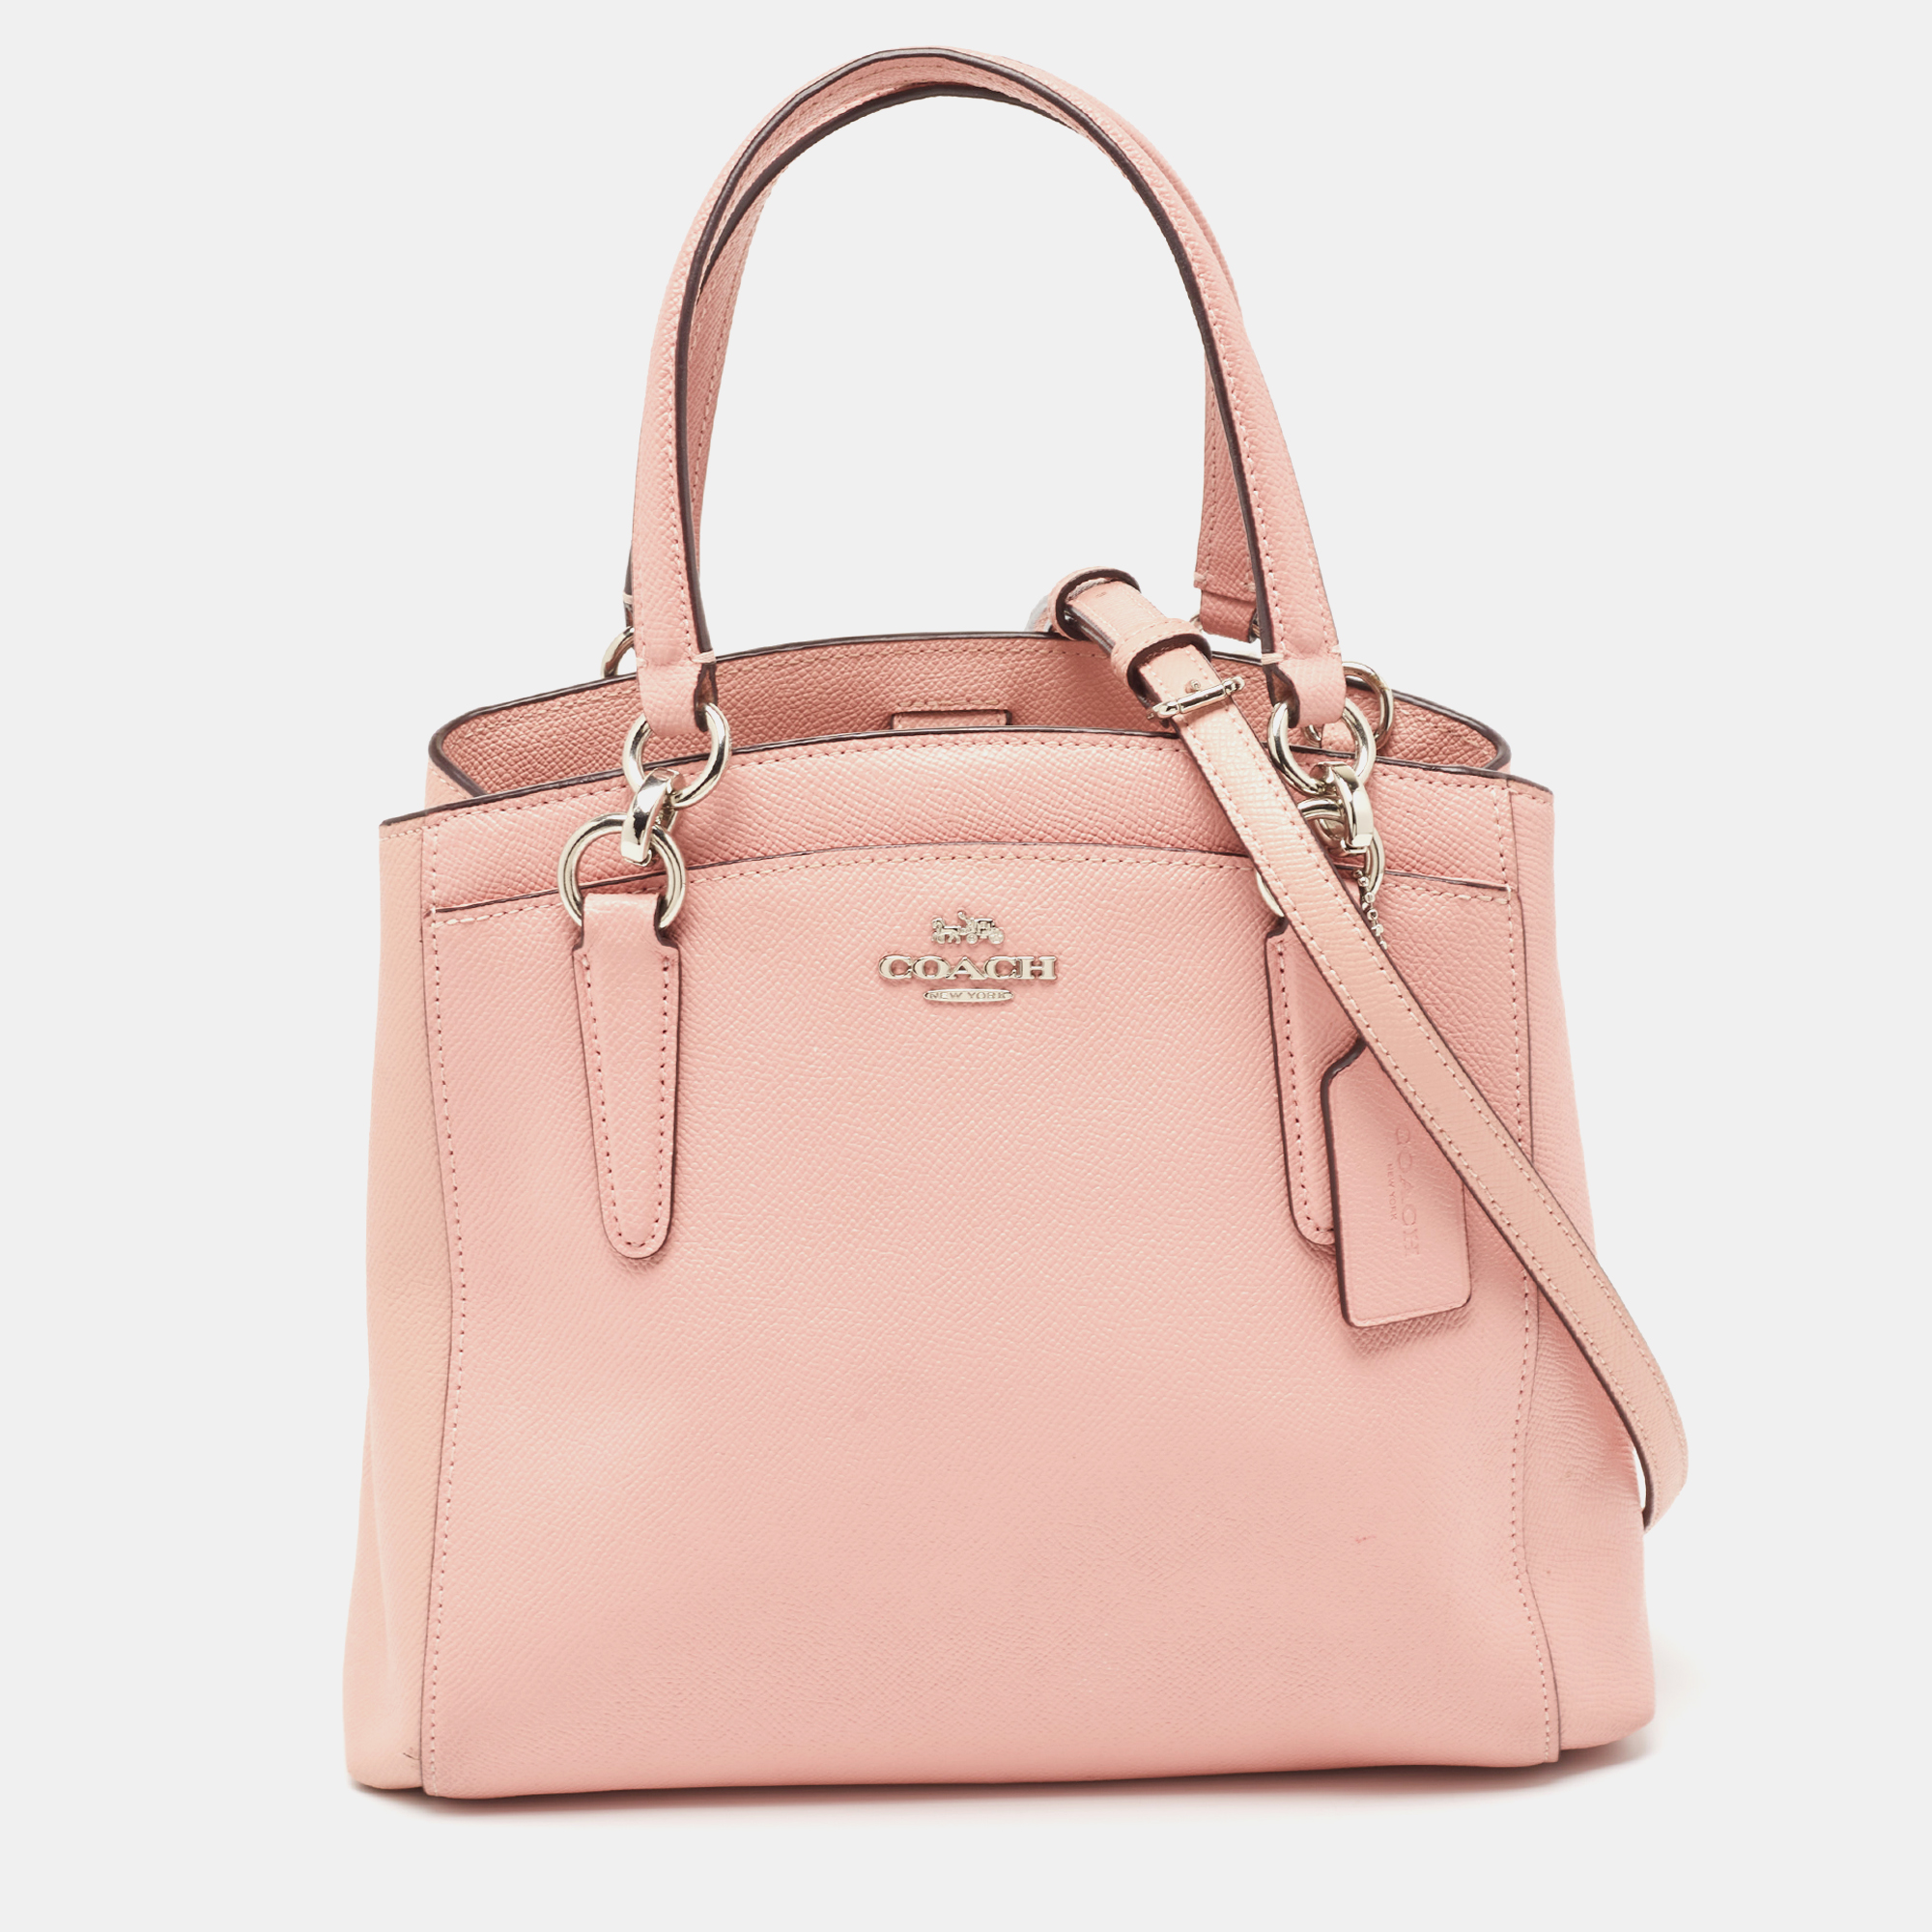 Pre-owned Coach Pink Leather Minetta Satchel